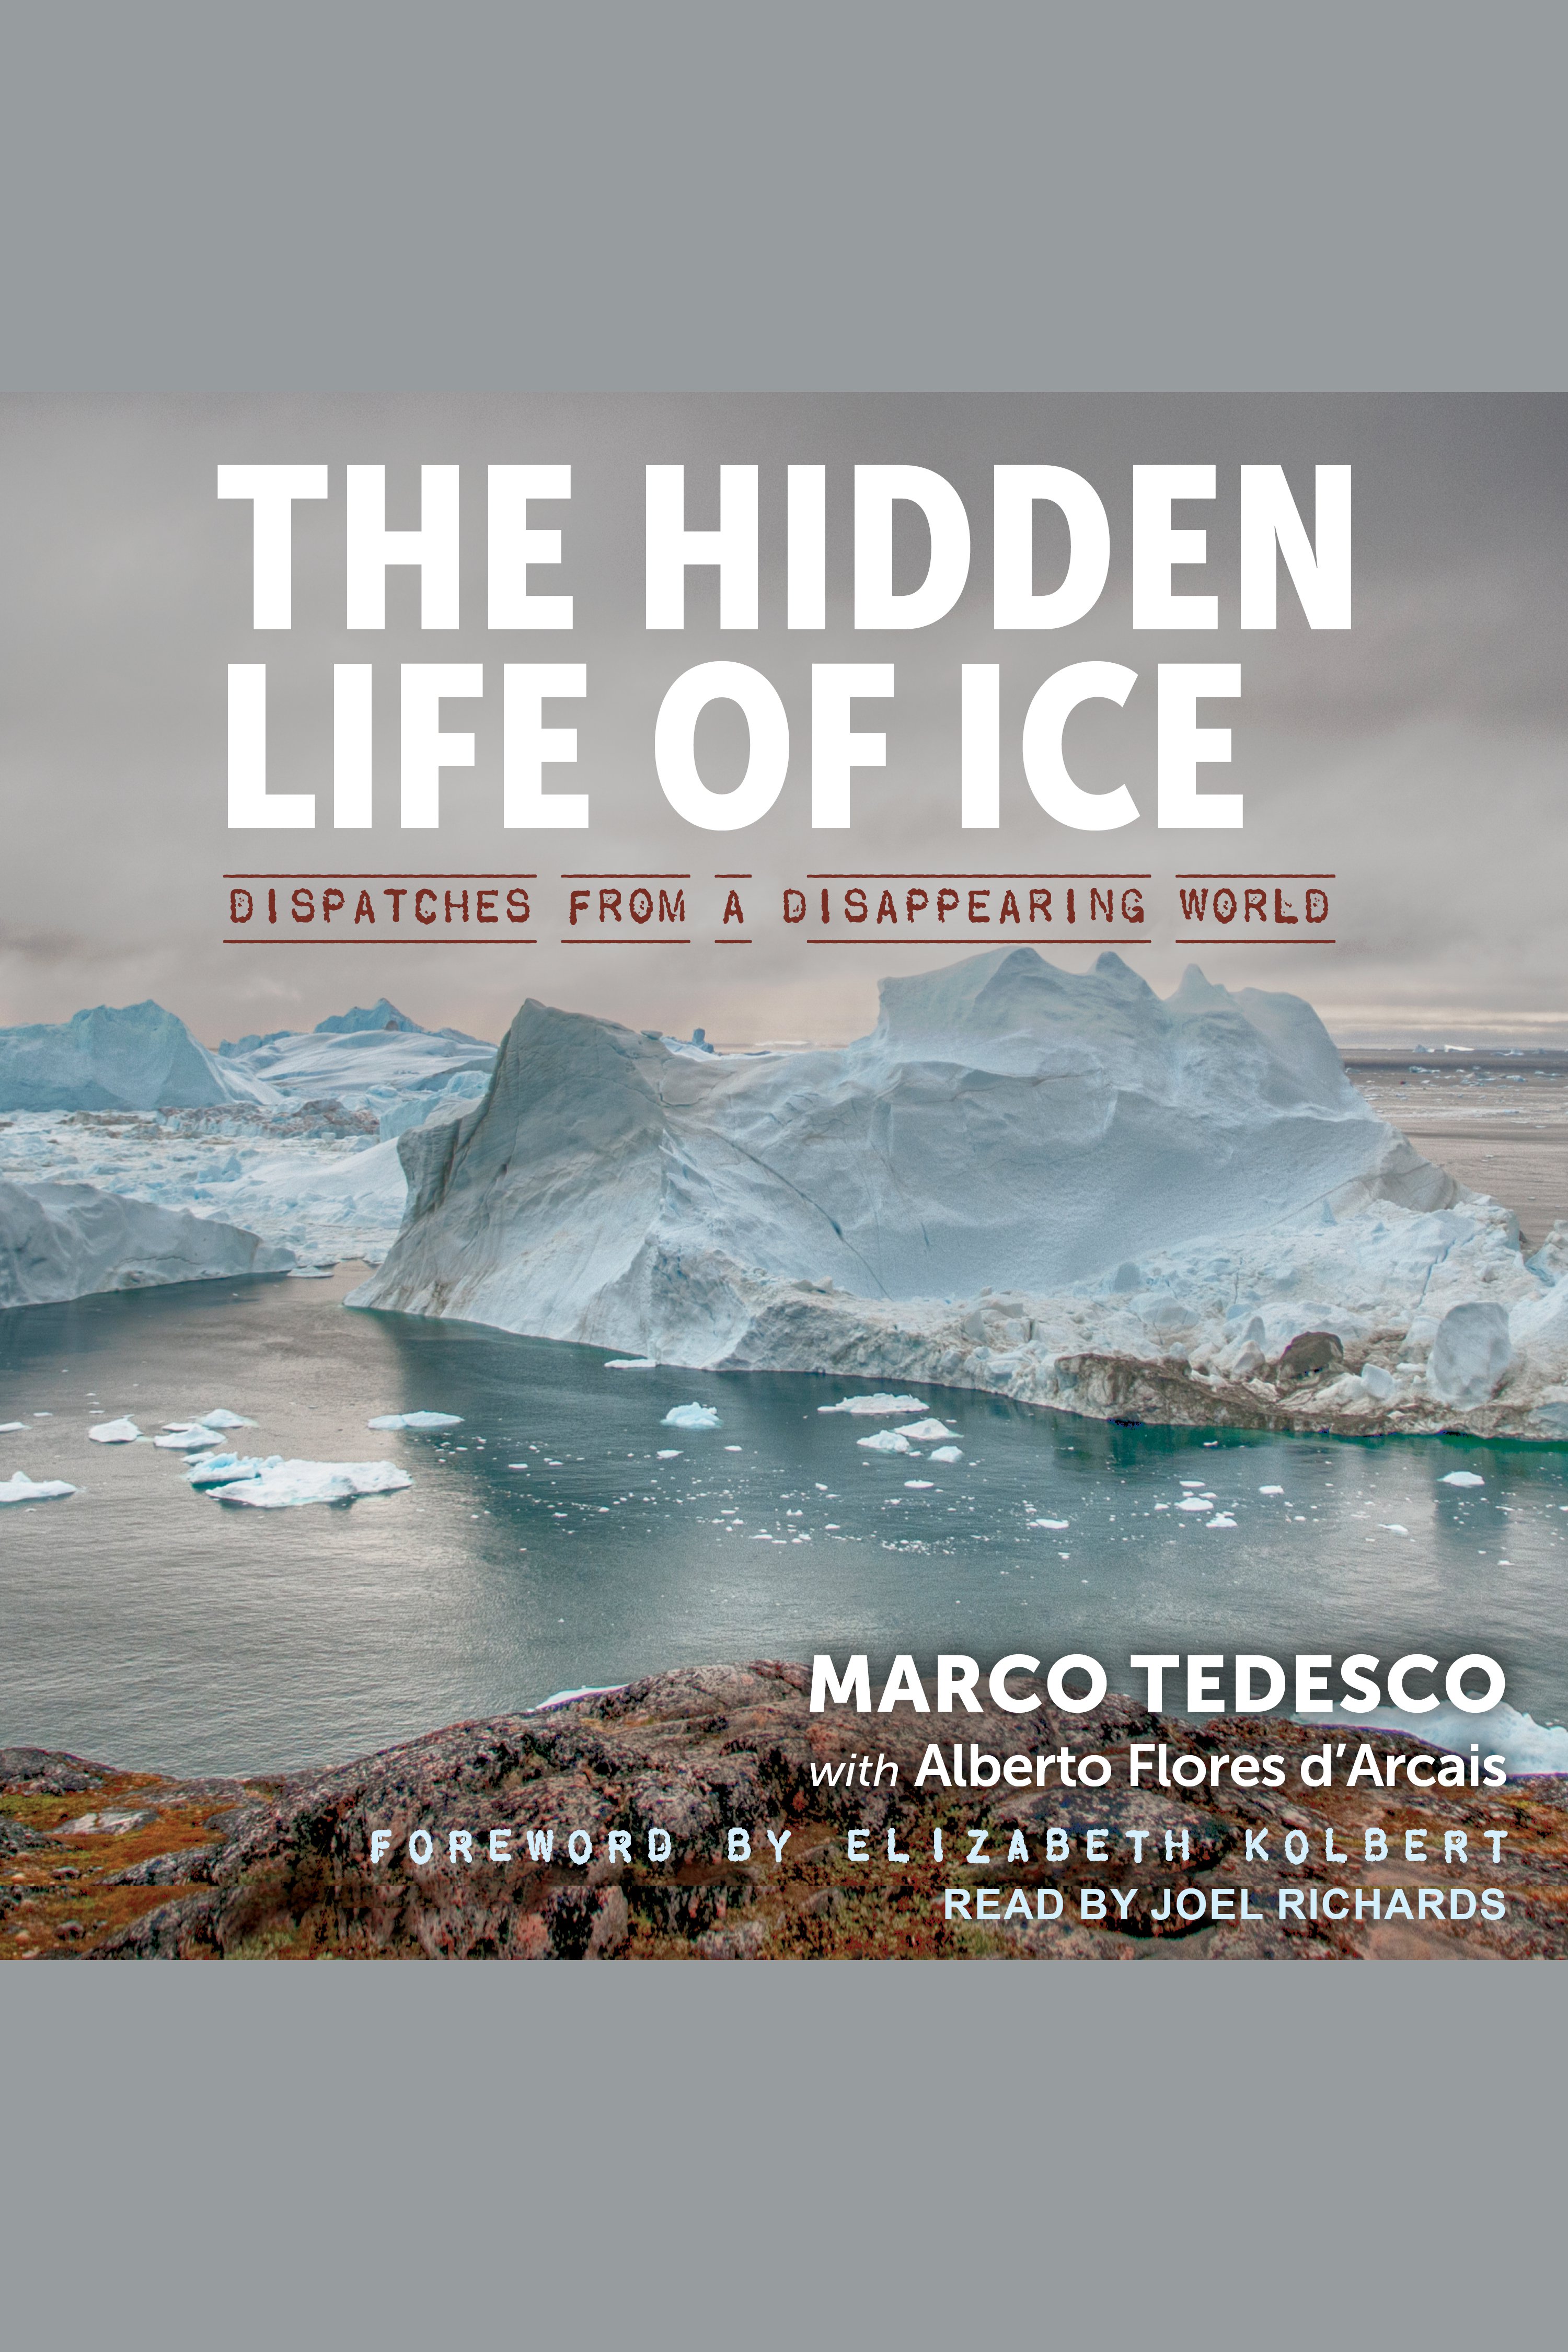 The hidden life of ice dispatches from a disappearing world cover image